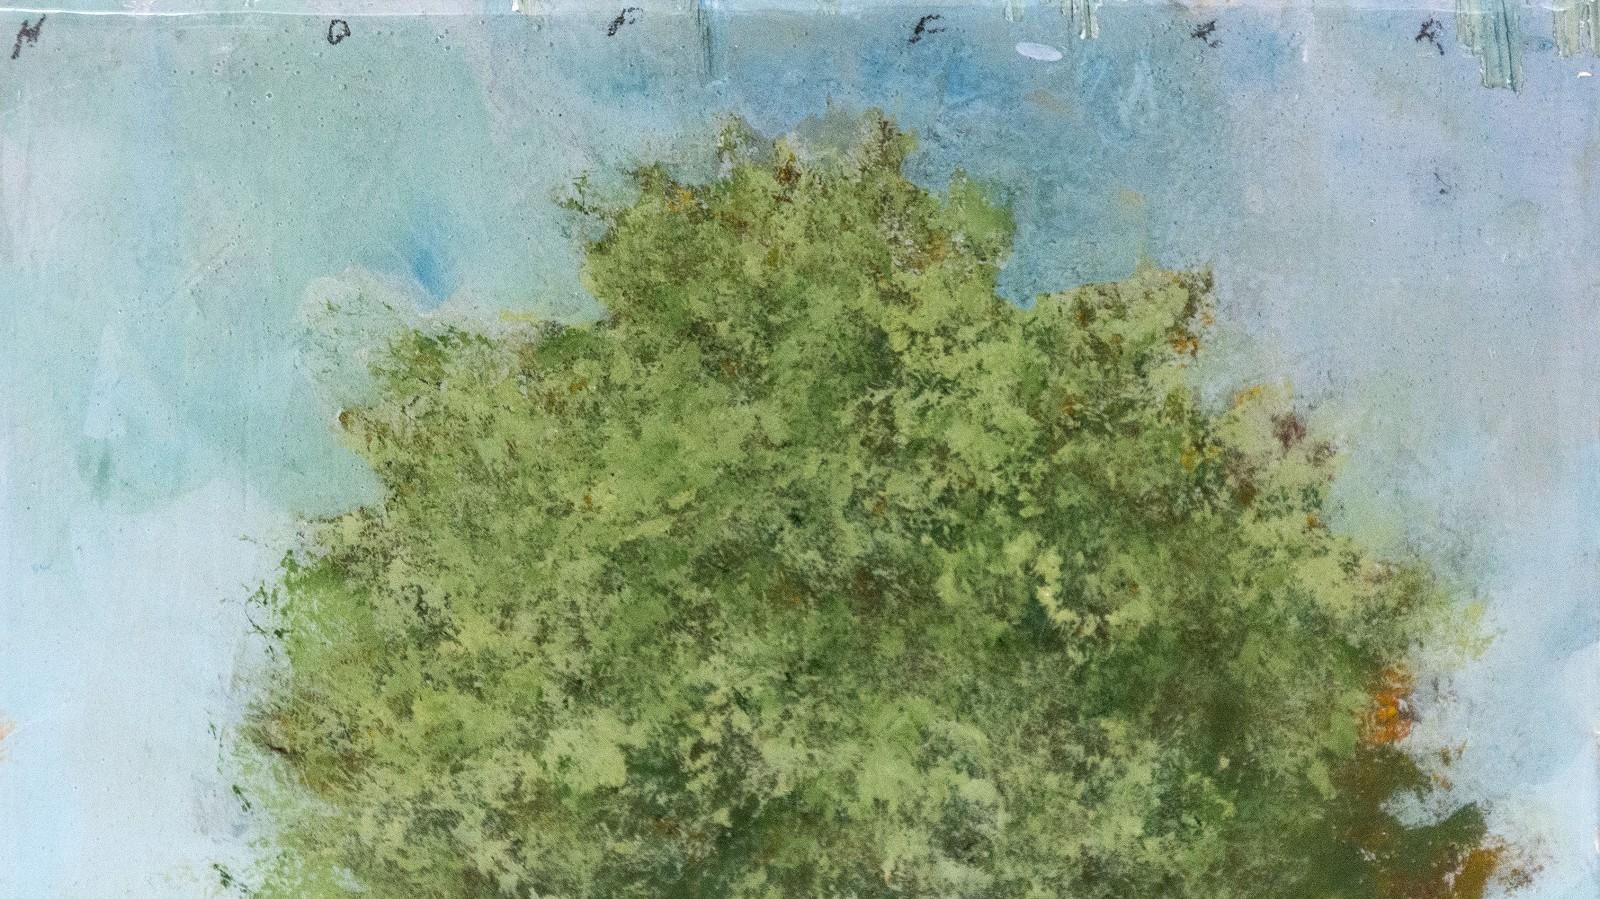 Tree Portrait 20202 - small, green, blue, figurative, acrylic on panel series - Painting by Peter Hoffer